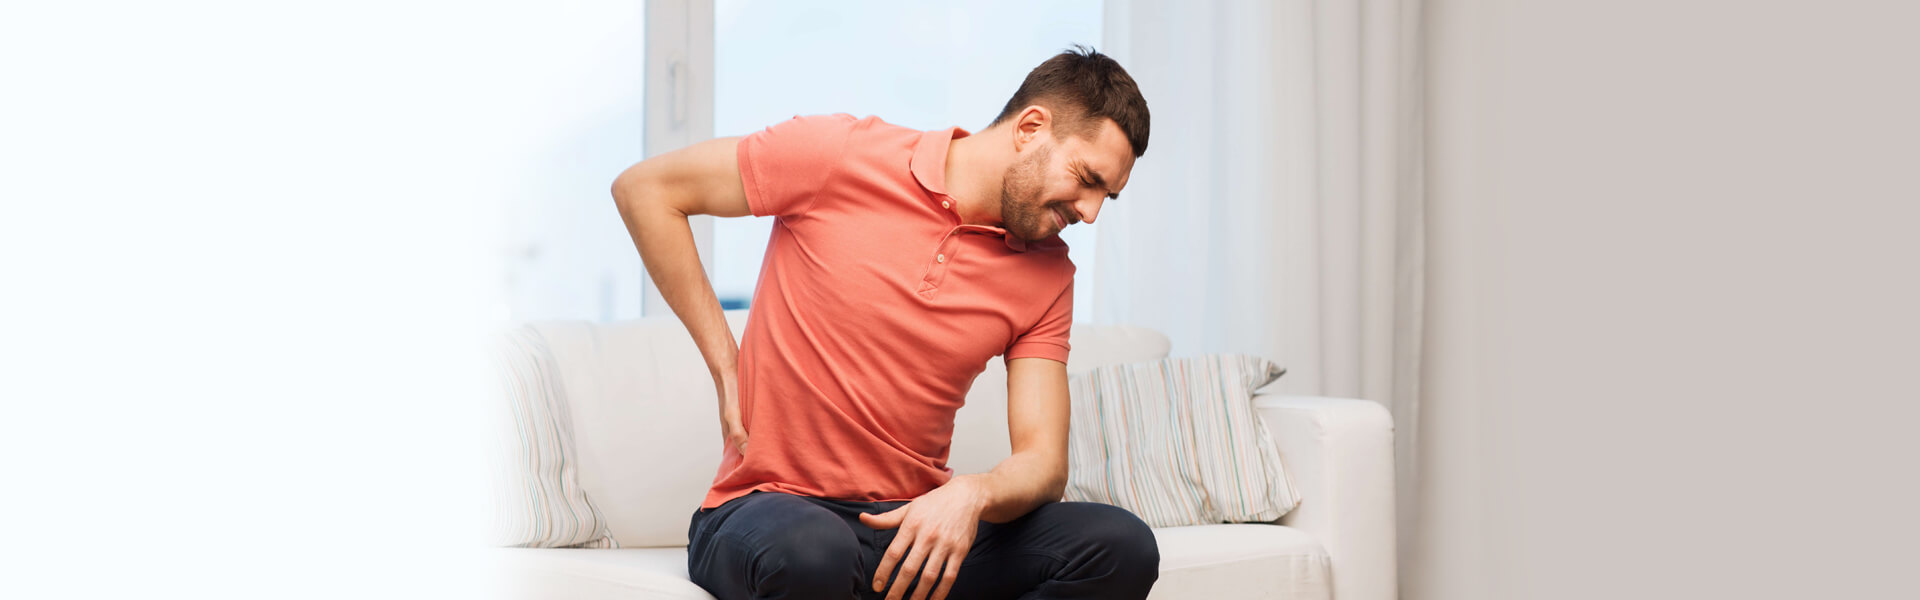 Lower Back Pain Risk Factors, Diagnosis and Treatment